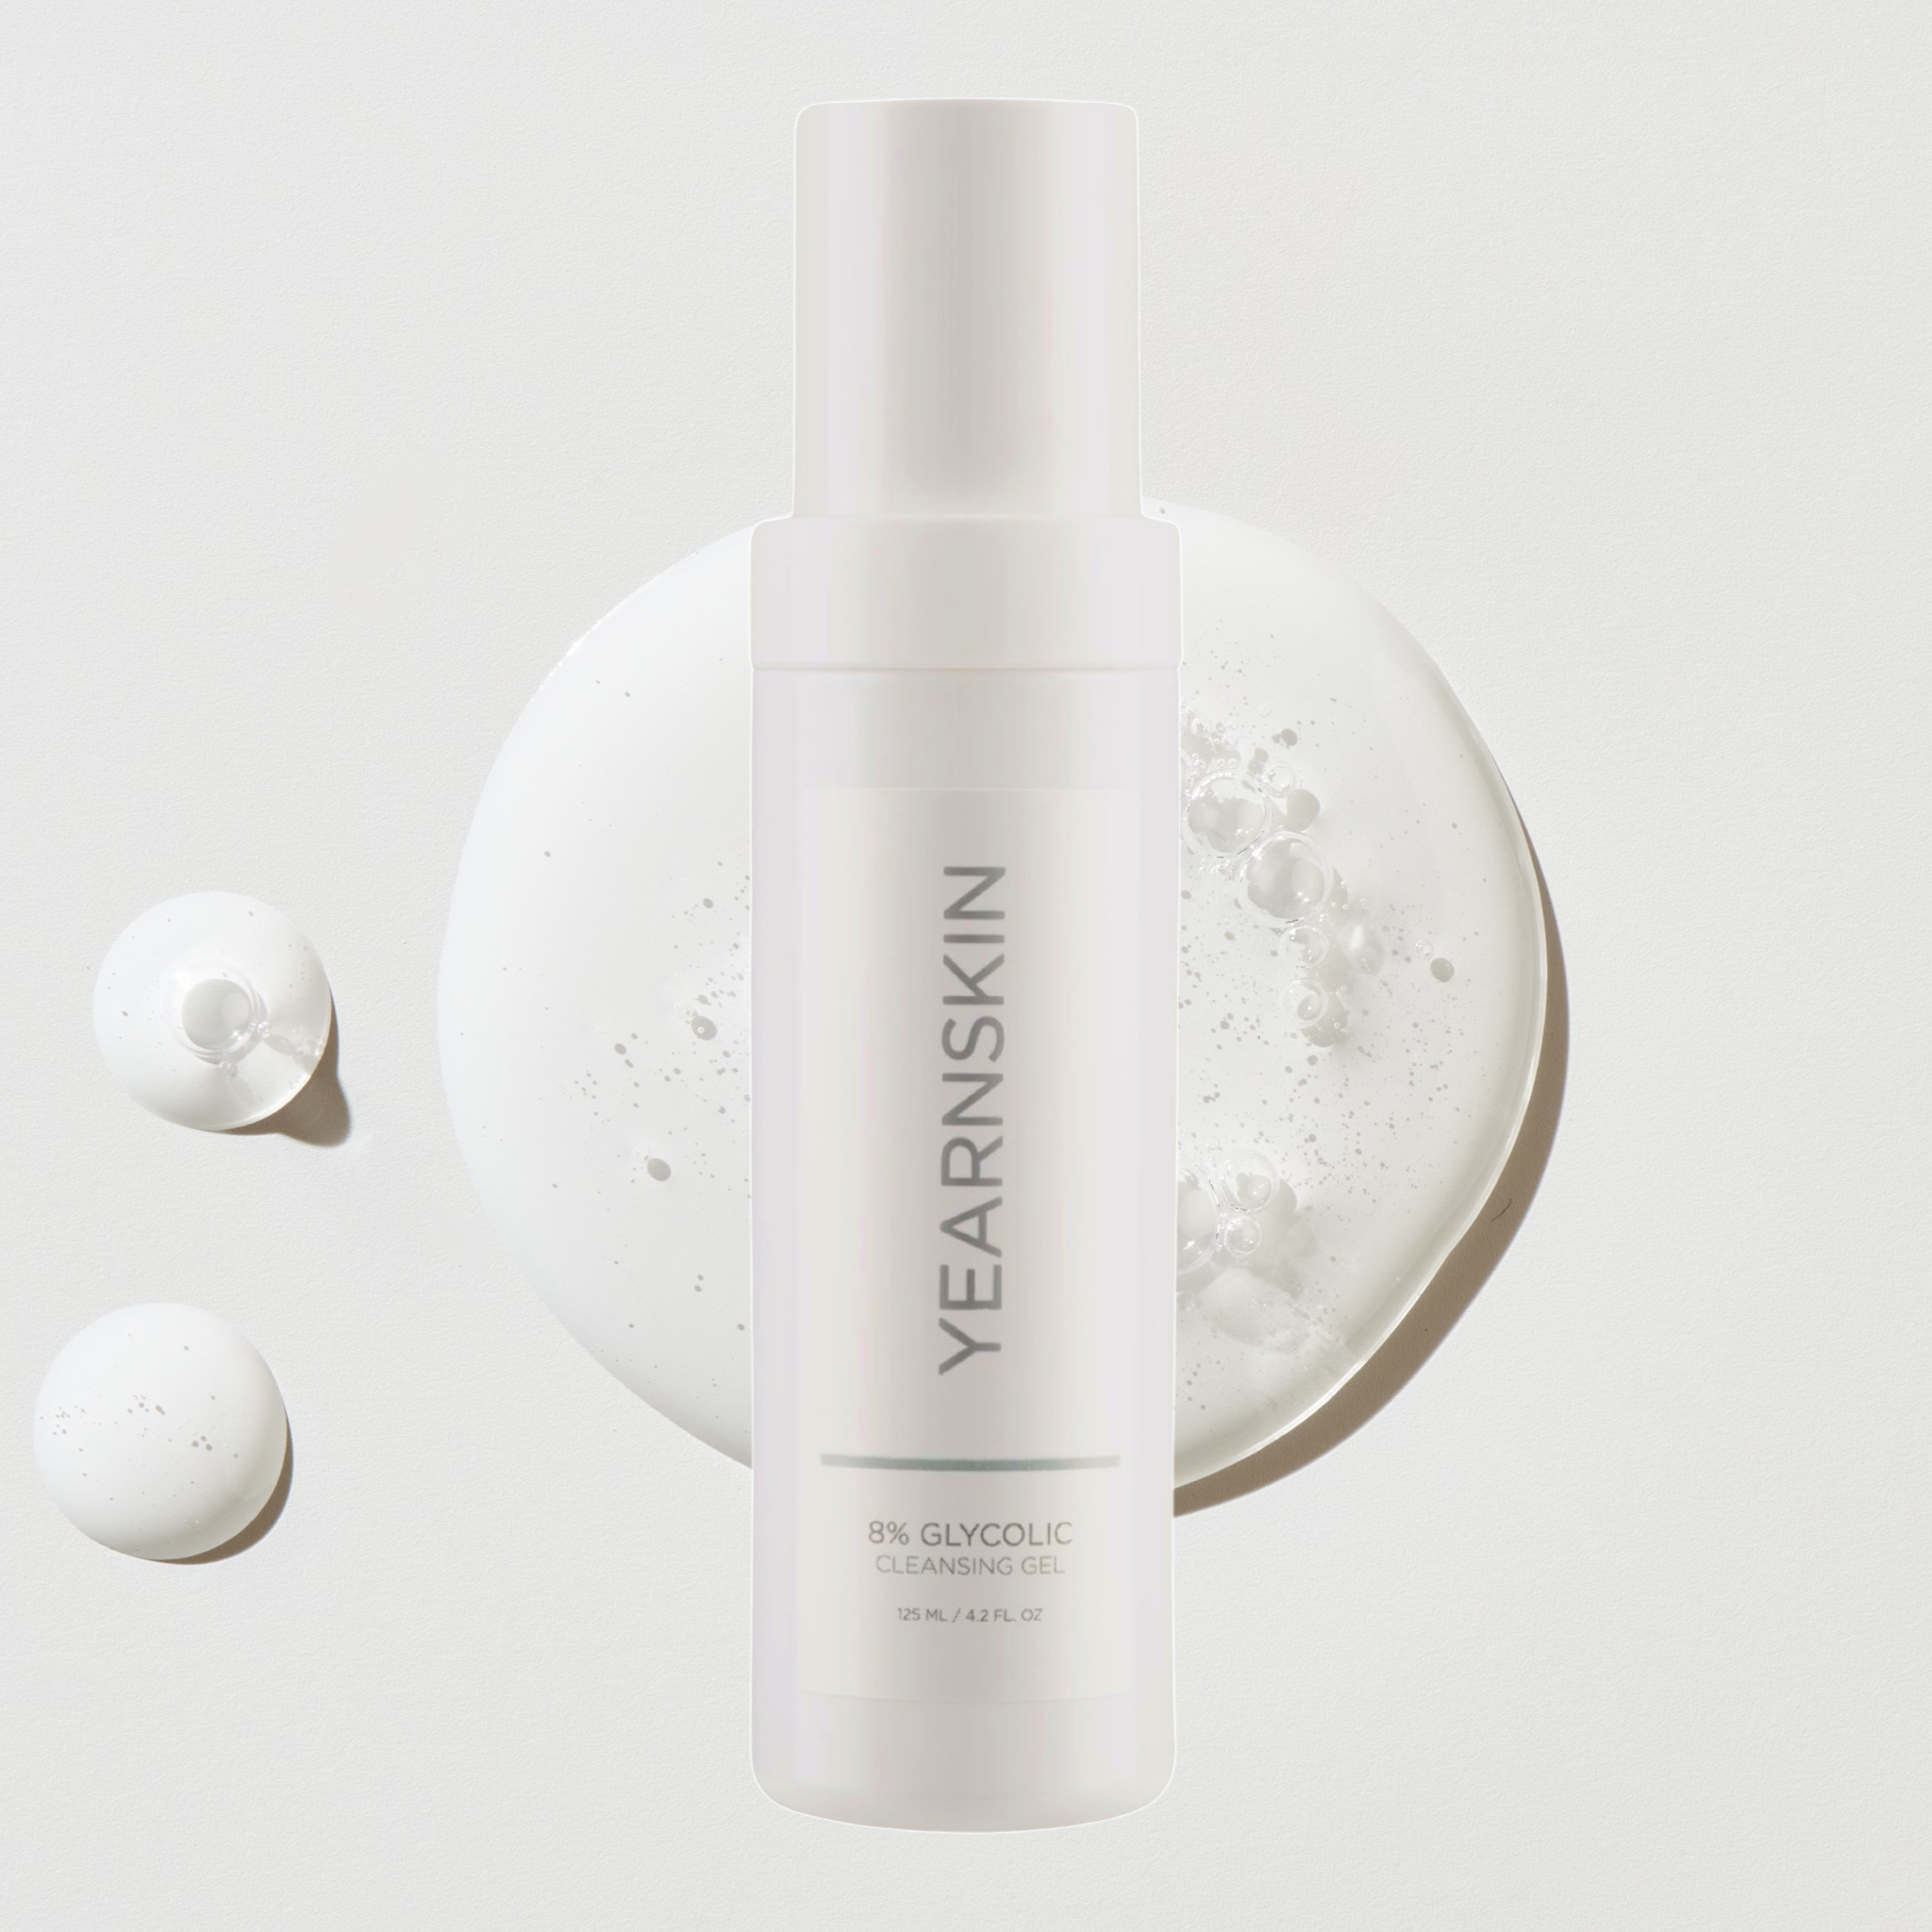 8% Glycolic Cleansing Gel - Exfoliating Cleanser | 125ml